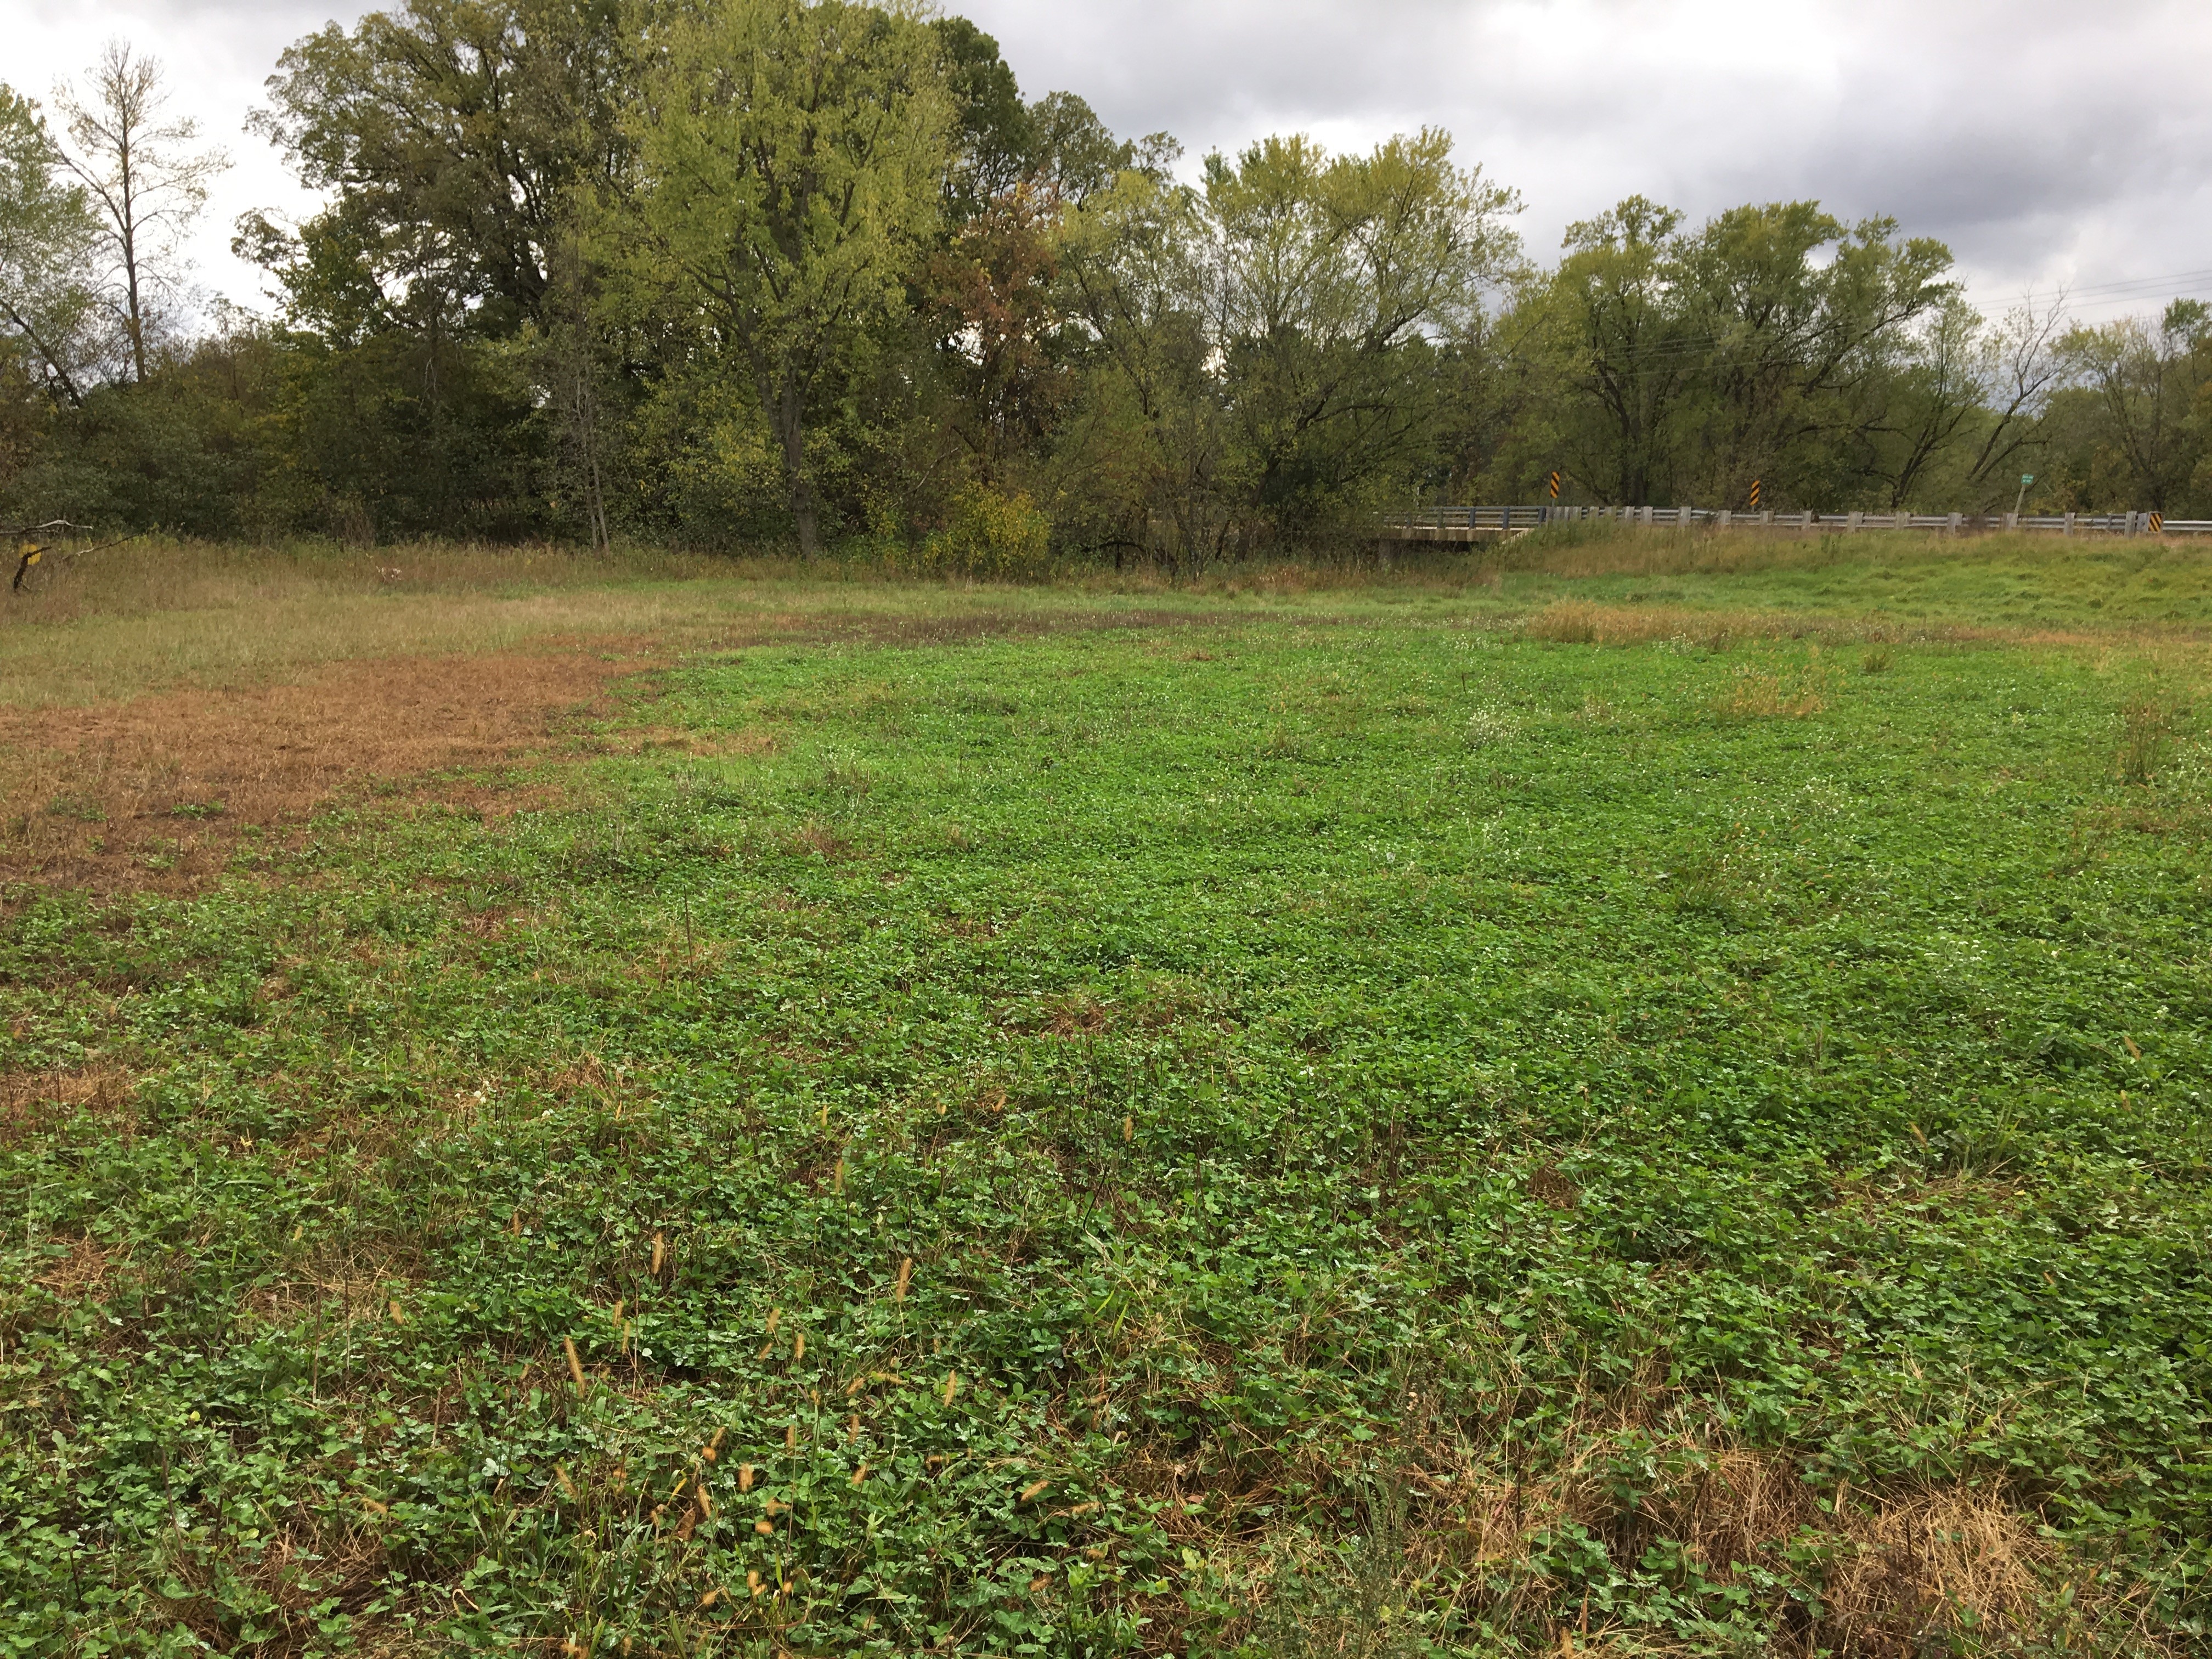 Small but unproductive areas, such as this field corner coming back to grass and forbs, provide an important mosaic of wildlife niches within a large-scale grain operation.